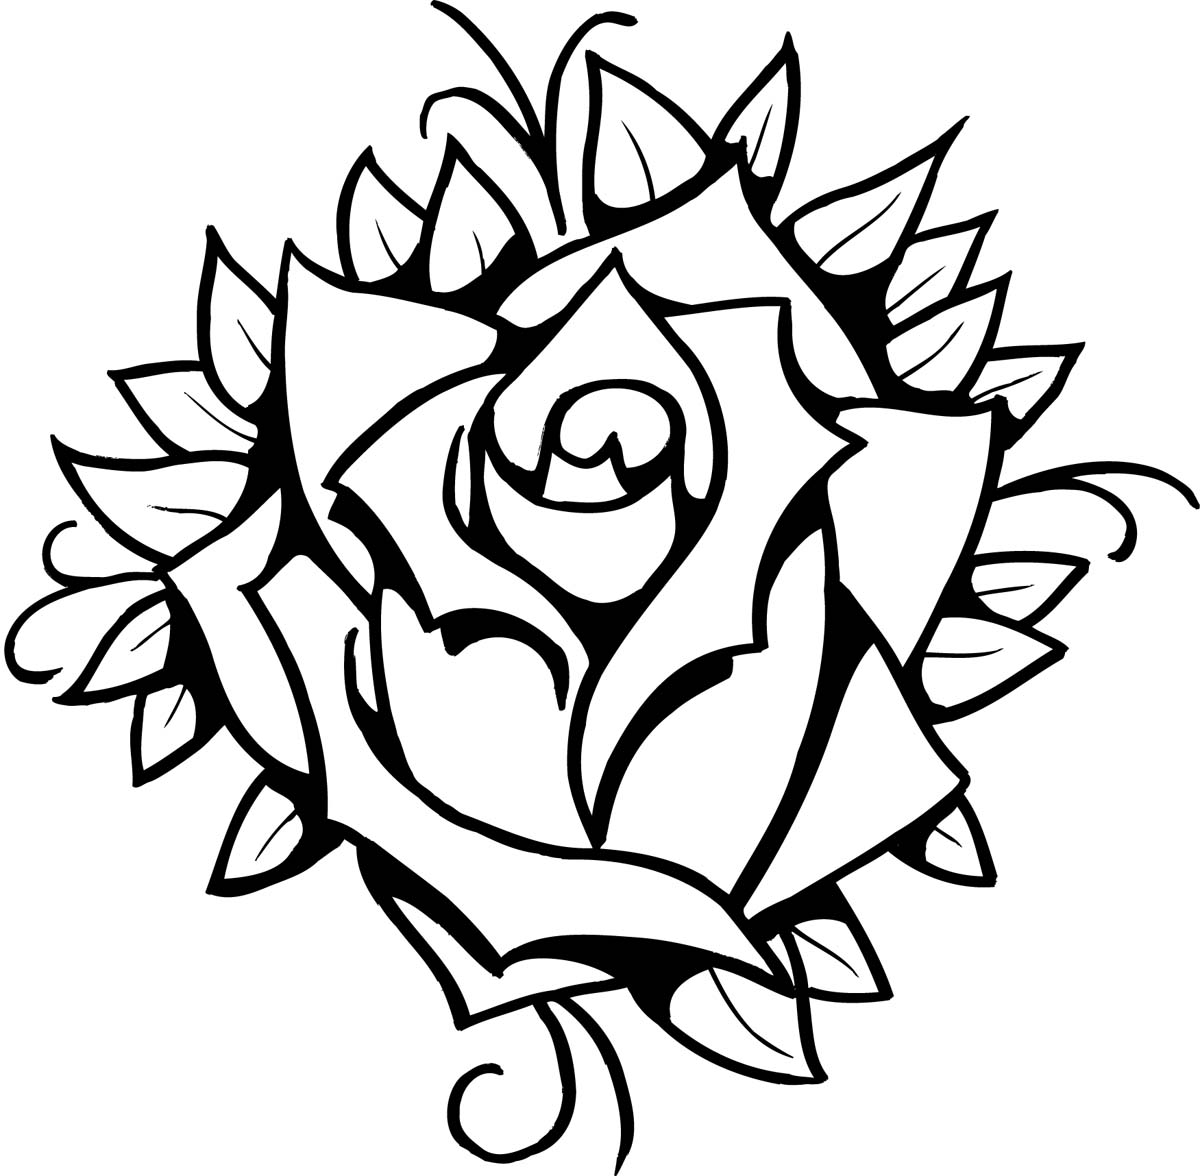 Rose Line Drawing - ClipArt Best